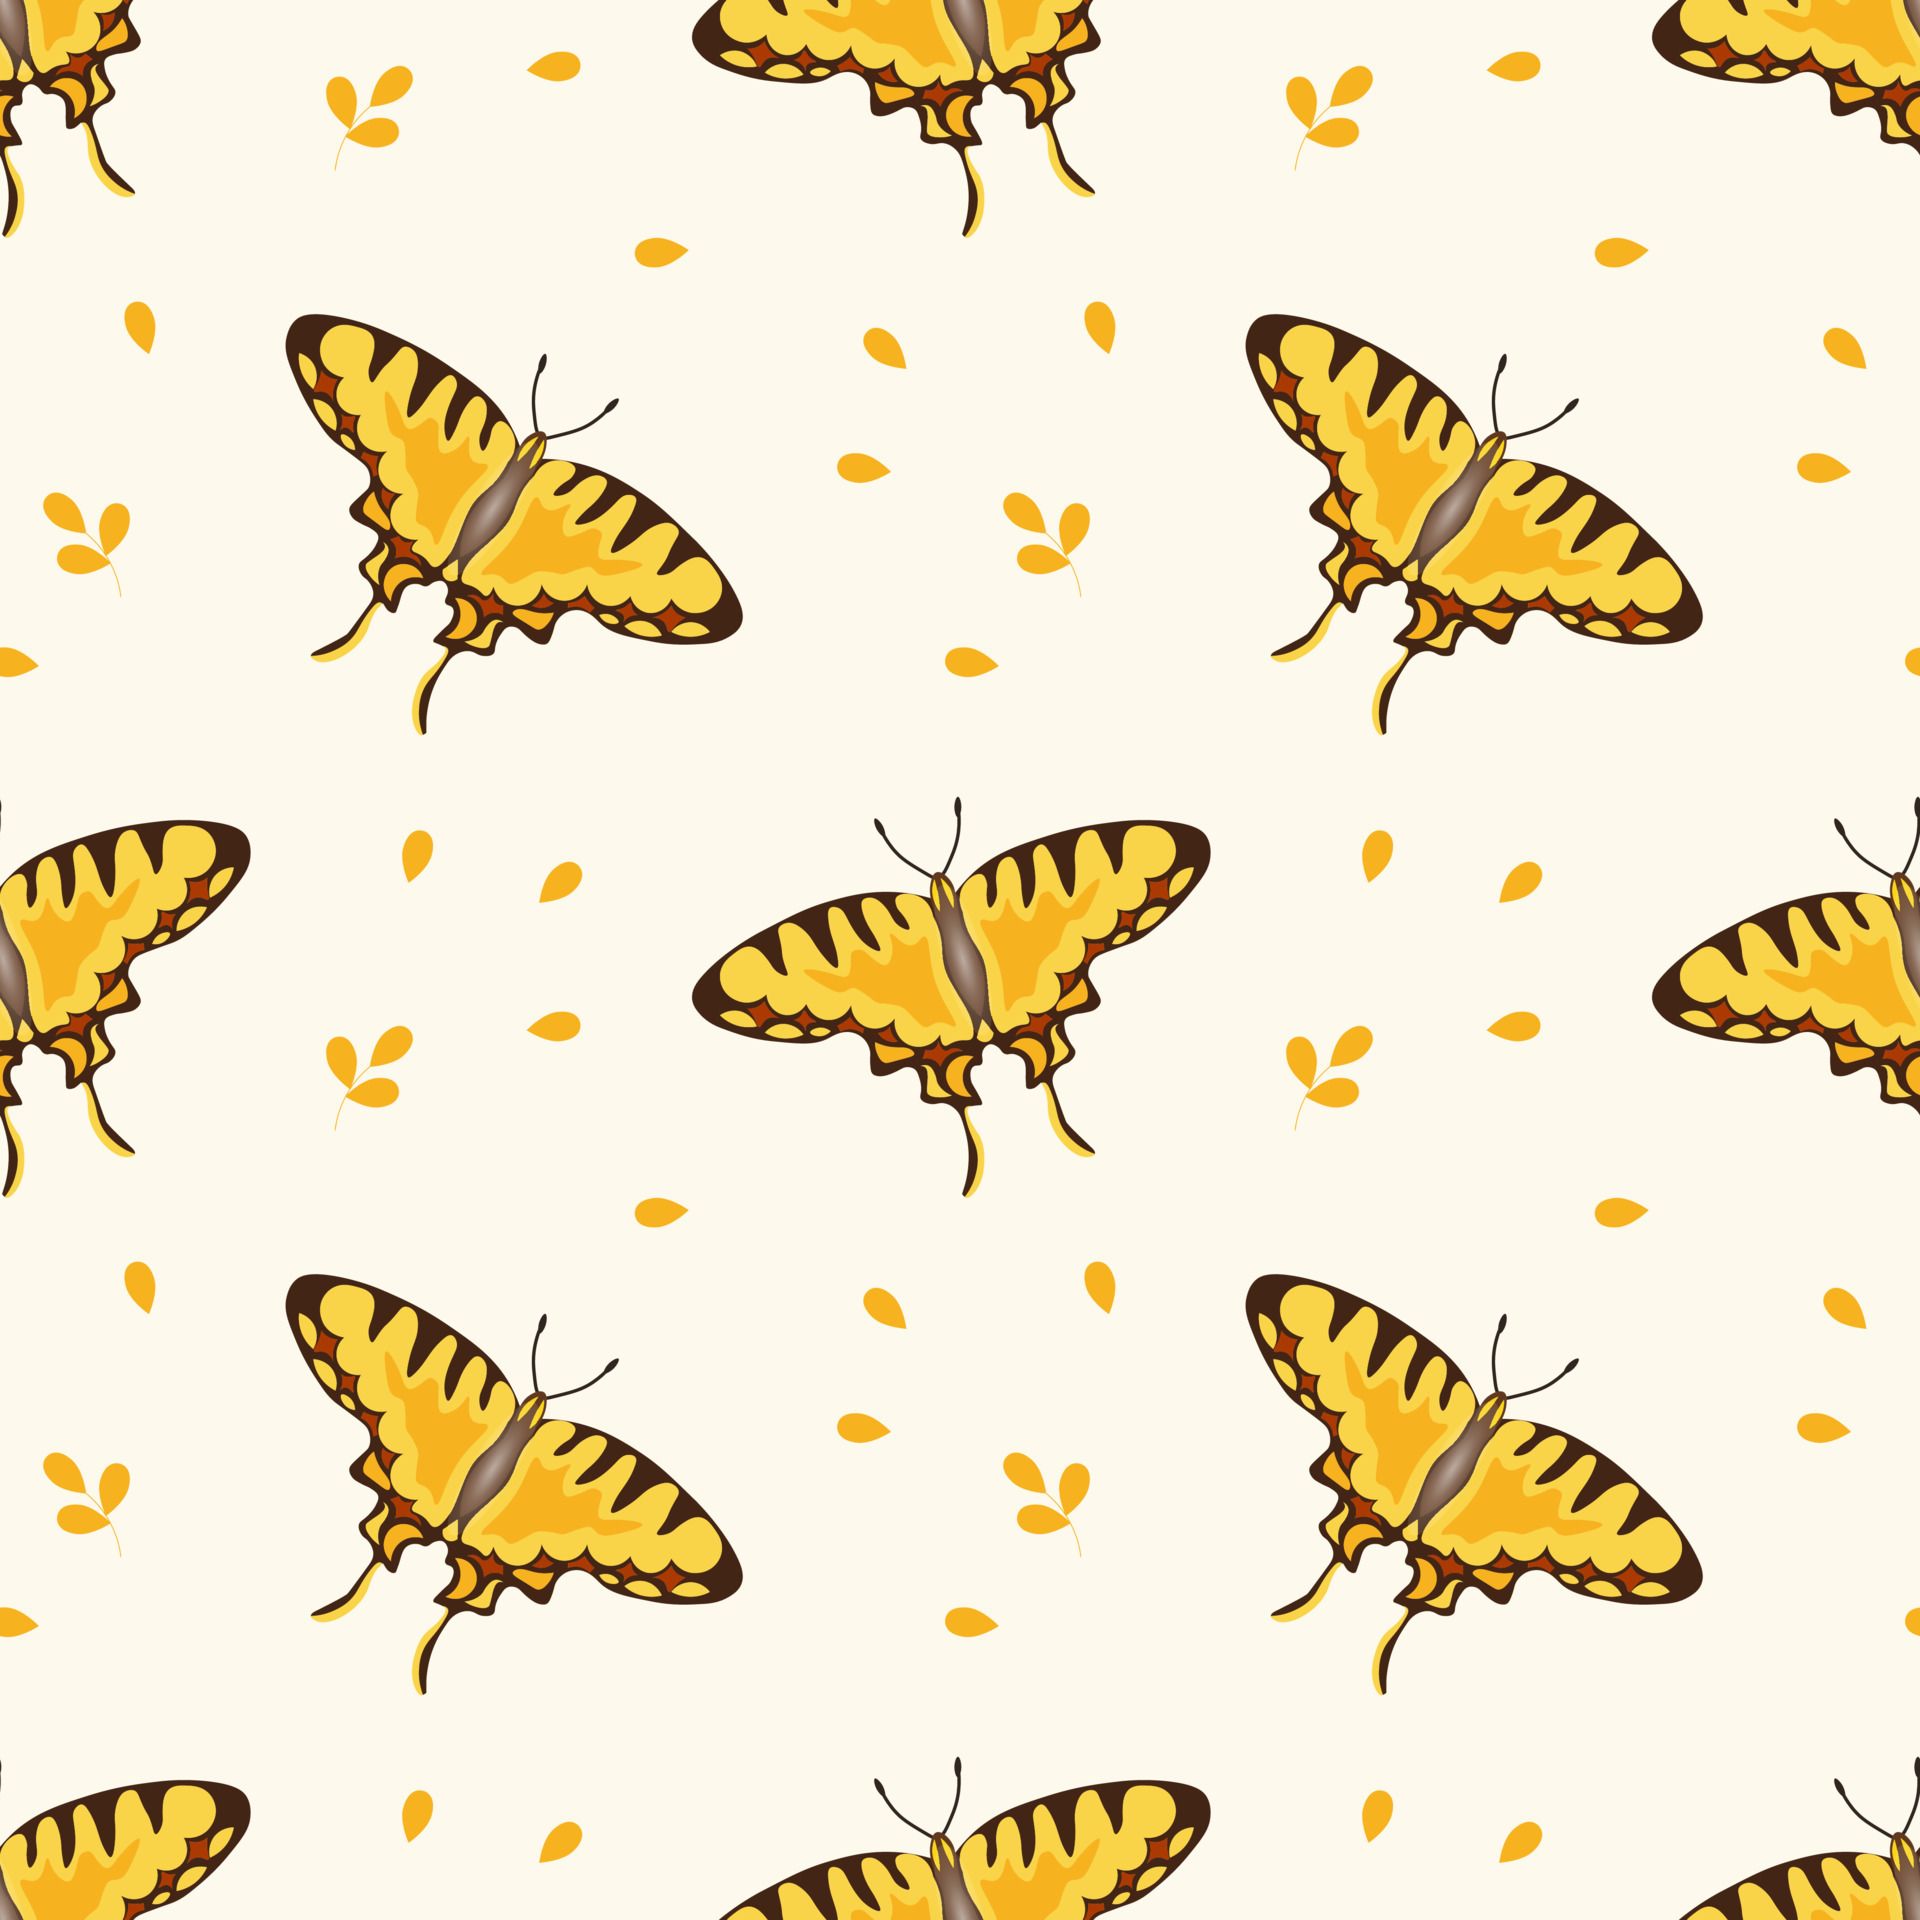 A pattern of yellow butterflies on white background - Light yellow